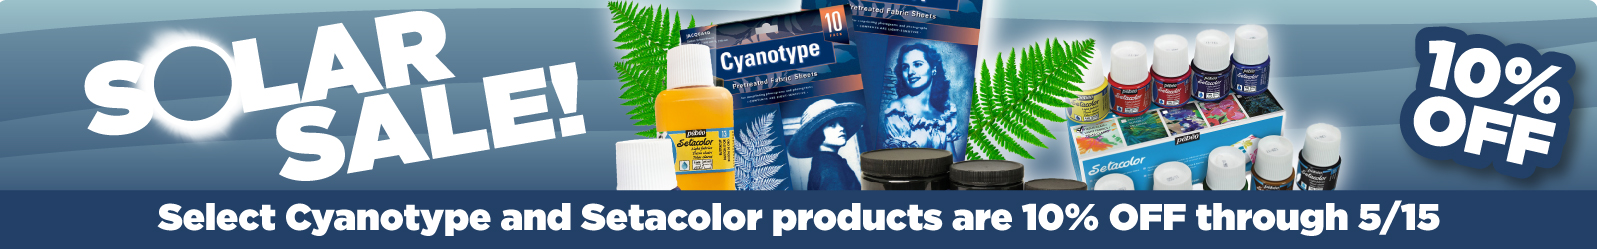 Solar Sale! Select Cyanotype and Setacolor products are 10% off through 5/15